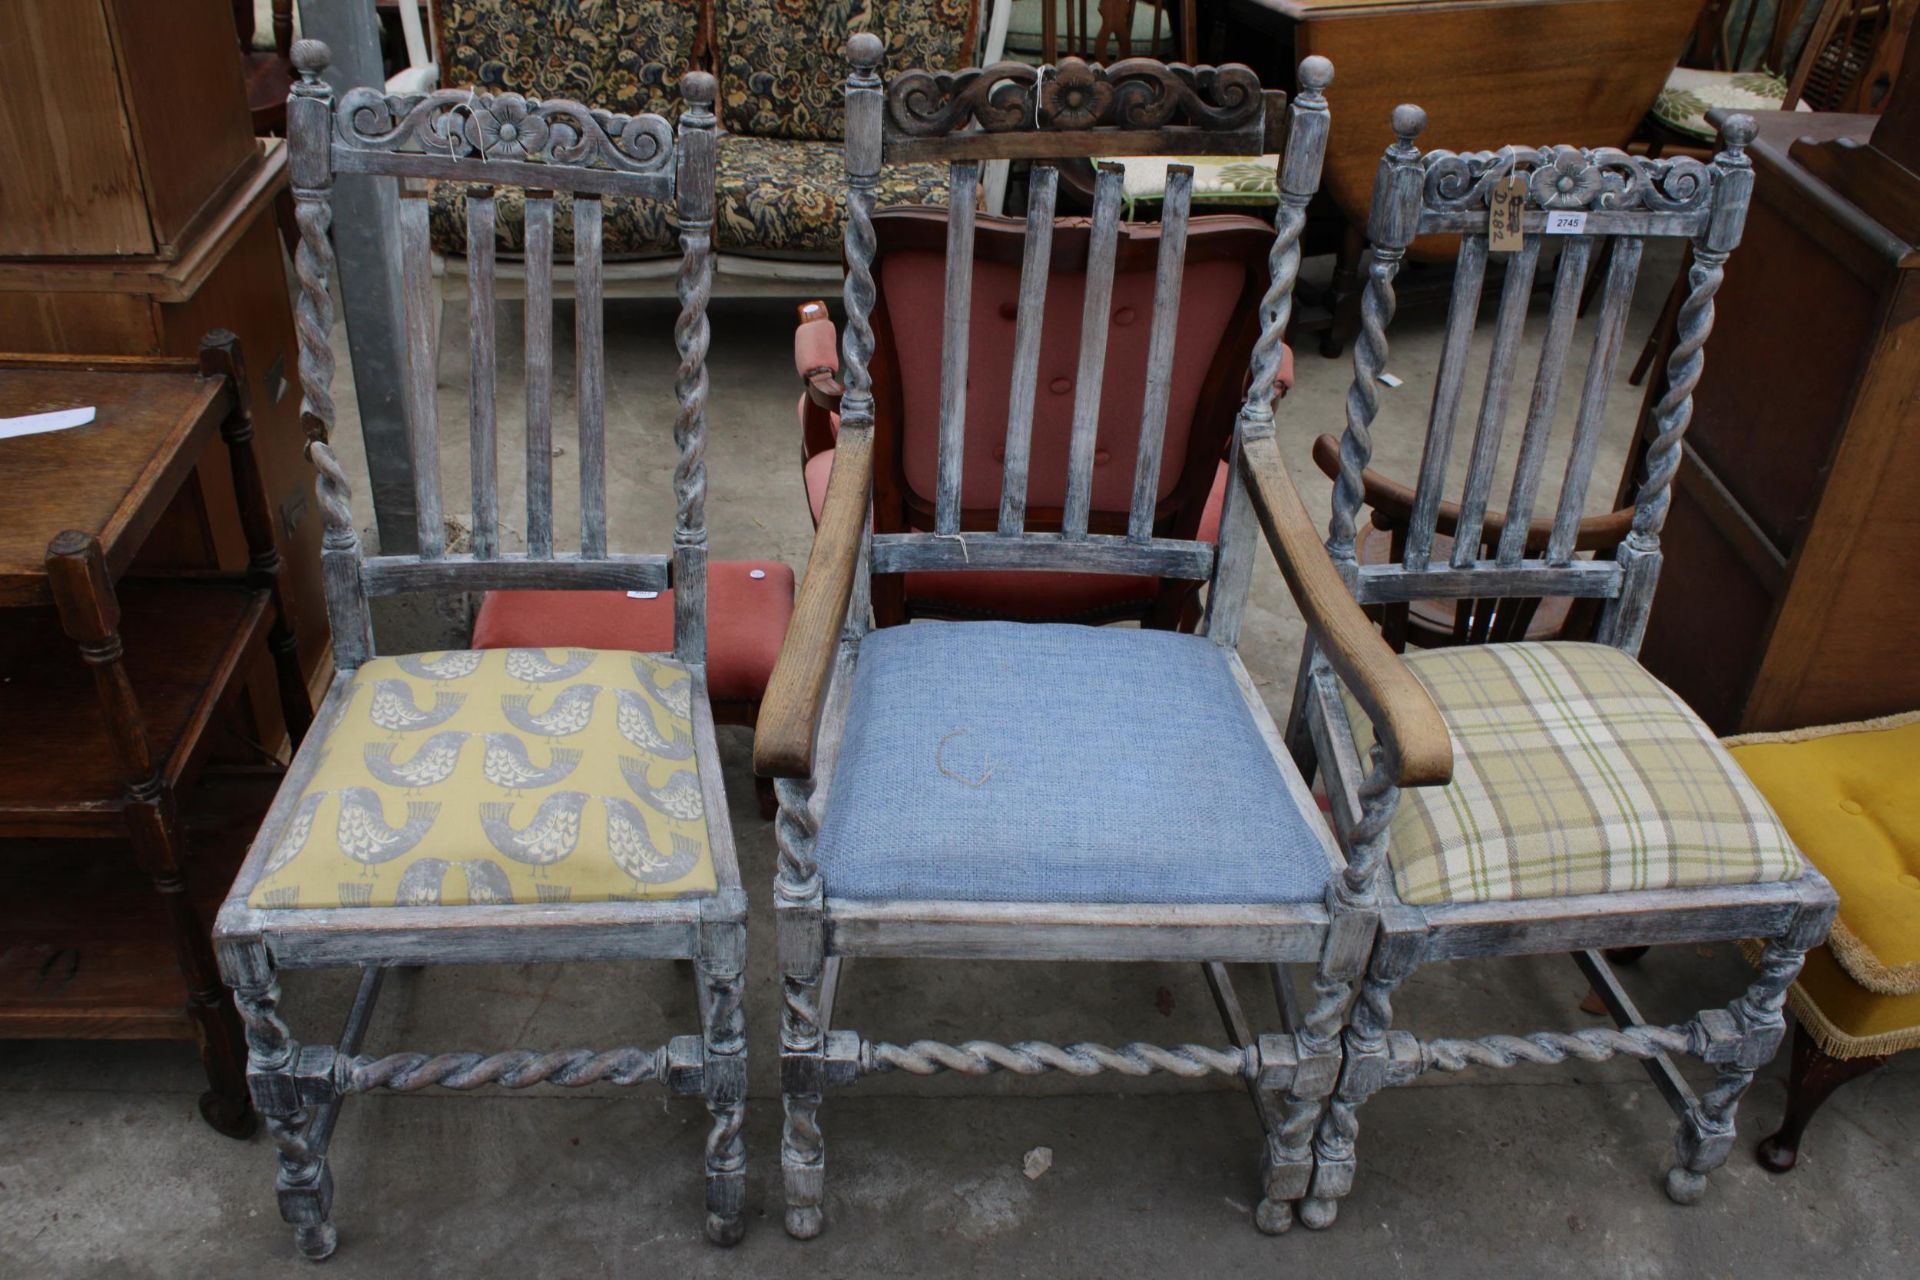 THREE EARLY 20TH CENTURY LIMEDOAK DINING CHAIRS, ONE BEING A CARVER ON BARLEY TWIST LEGS AND